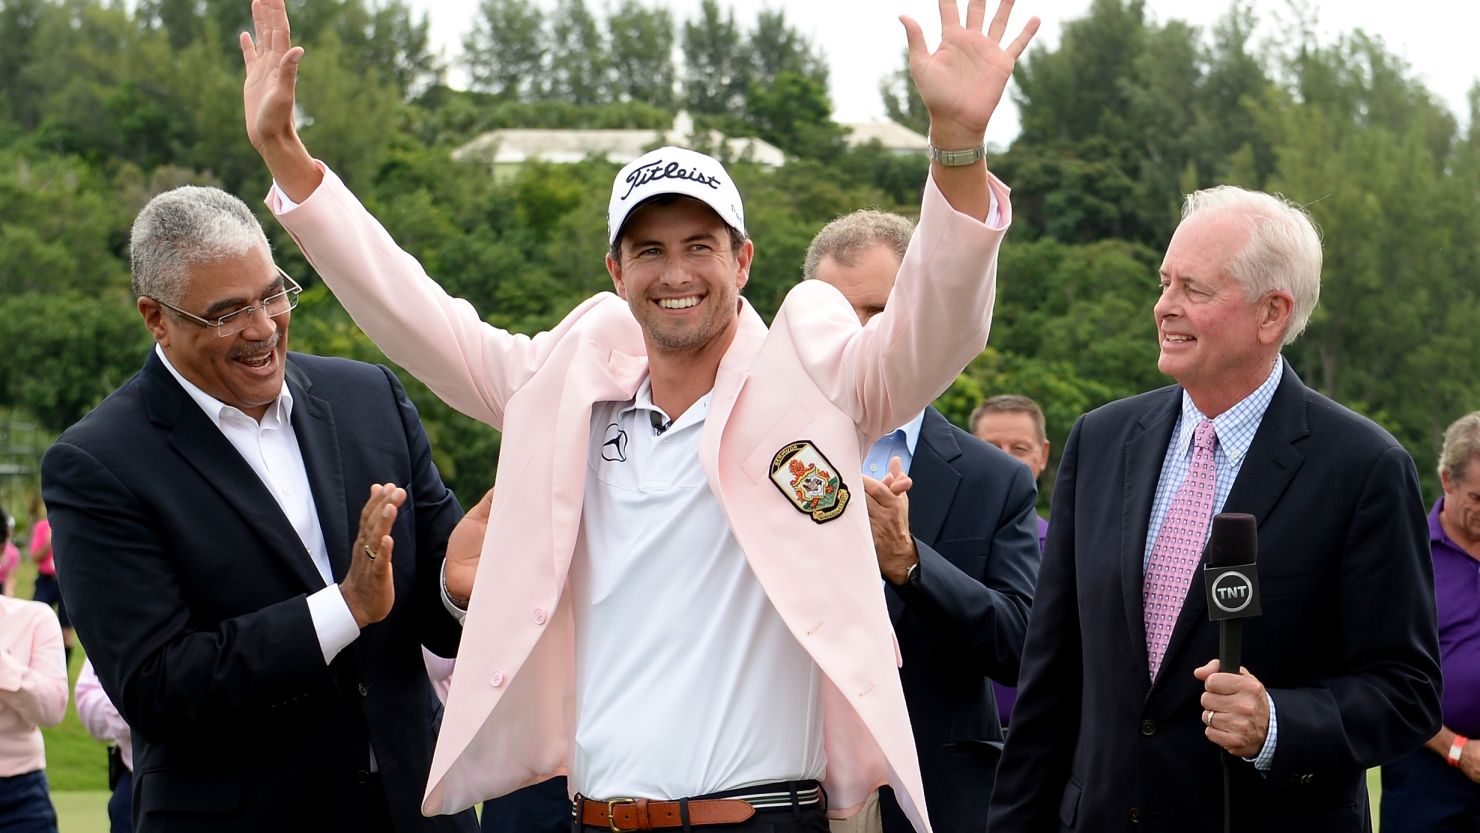 World No. 2 Adam Scott won the first major of his career at the Masters in April.